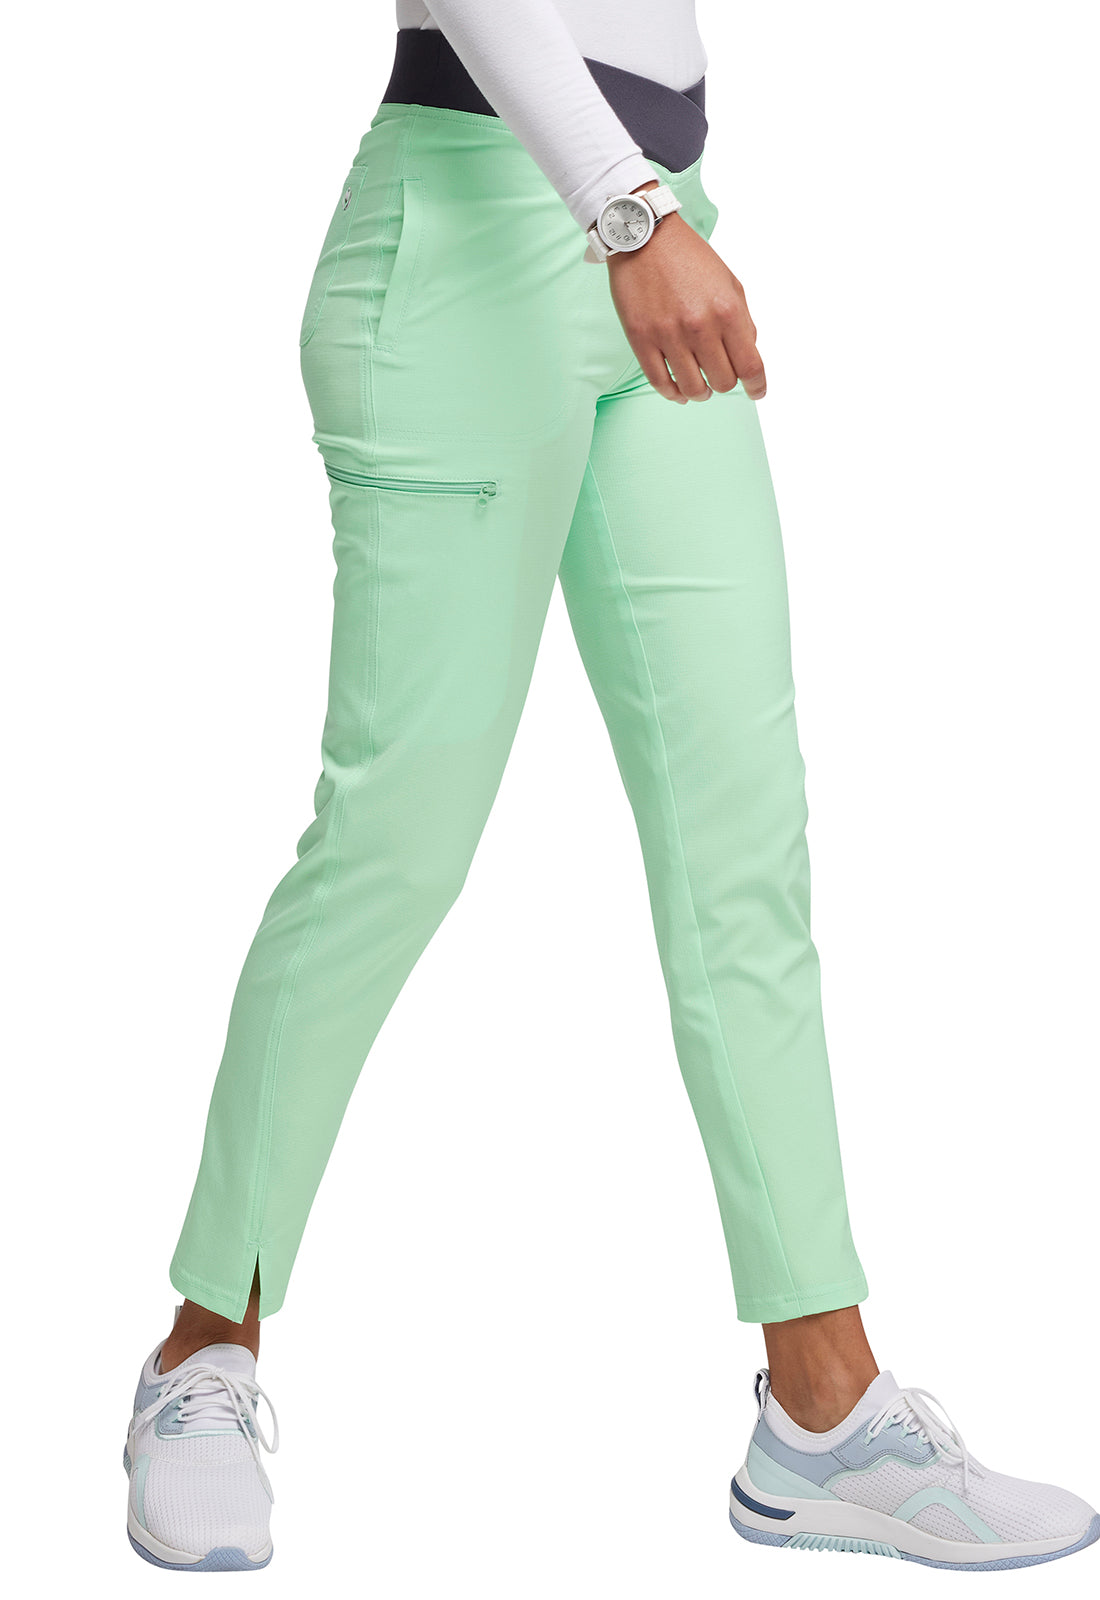 Heart & Soul Packable Pull On Pants (5 Colors Up to 3XL) – Berani